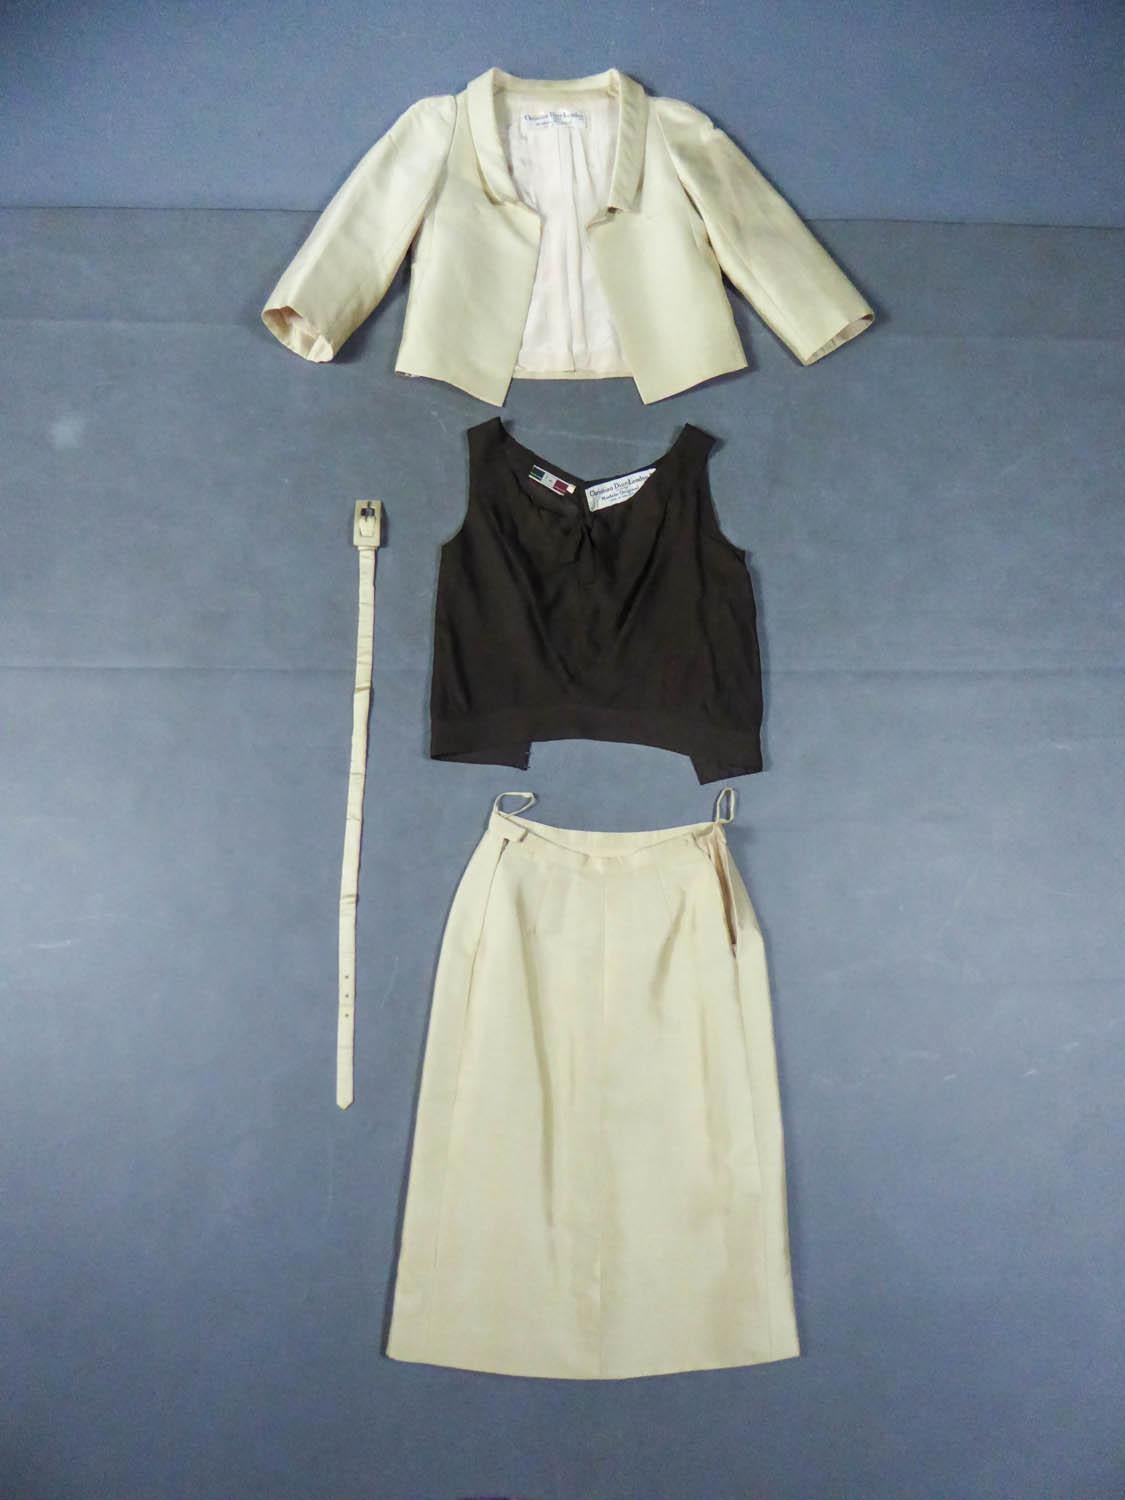 Circa 1962
France - England

Demi Couture Christian Dior skirt suit set dating from the beginning of the direction of Mr. Marc Bohan at the head of the famous House around 1962. Suit in champagne cream gazar and brown silk crepe top. Open jacket